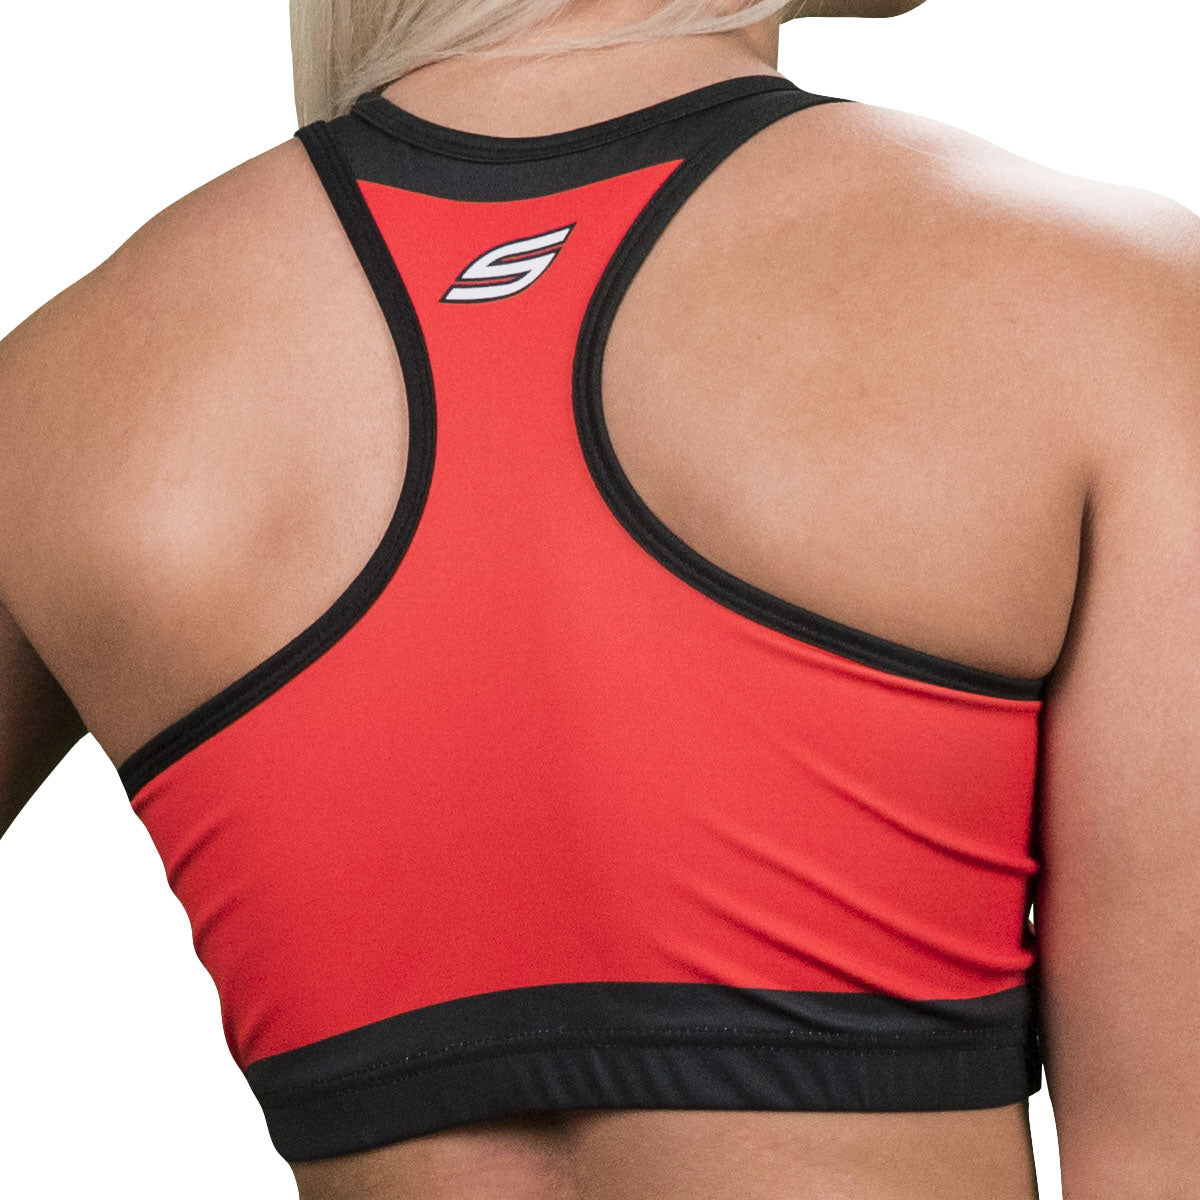 Grit Women's Racerback Padded Sports Bra, Stealth Black  Protect your  chest ladies! With our Social Padded Sports Bra, you'll be able to play  comfortably without worrying about leaving the field with